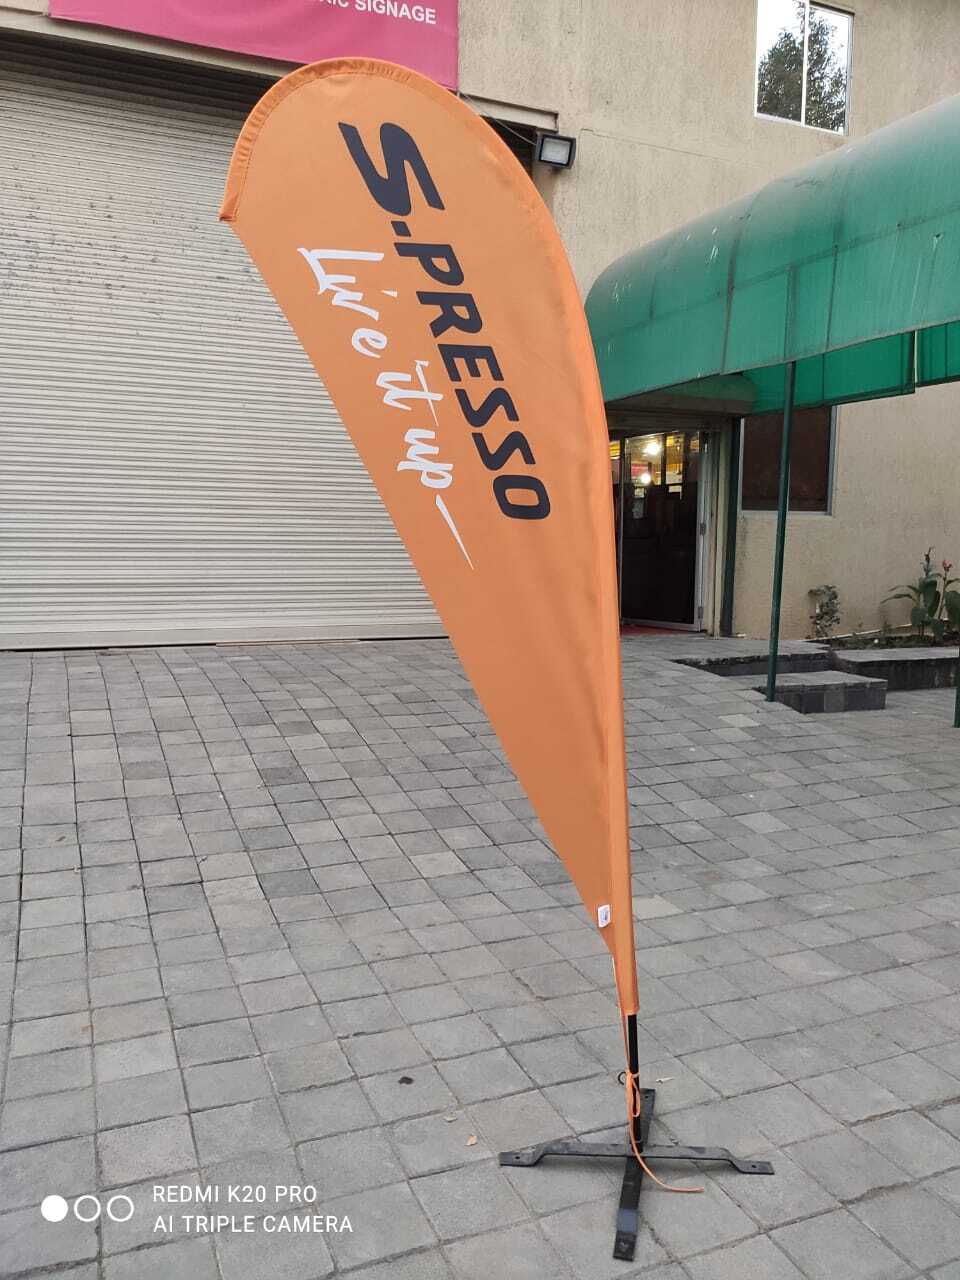 Promotional Flags